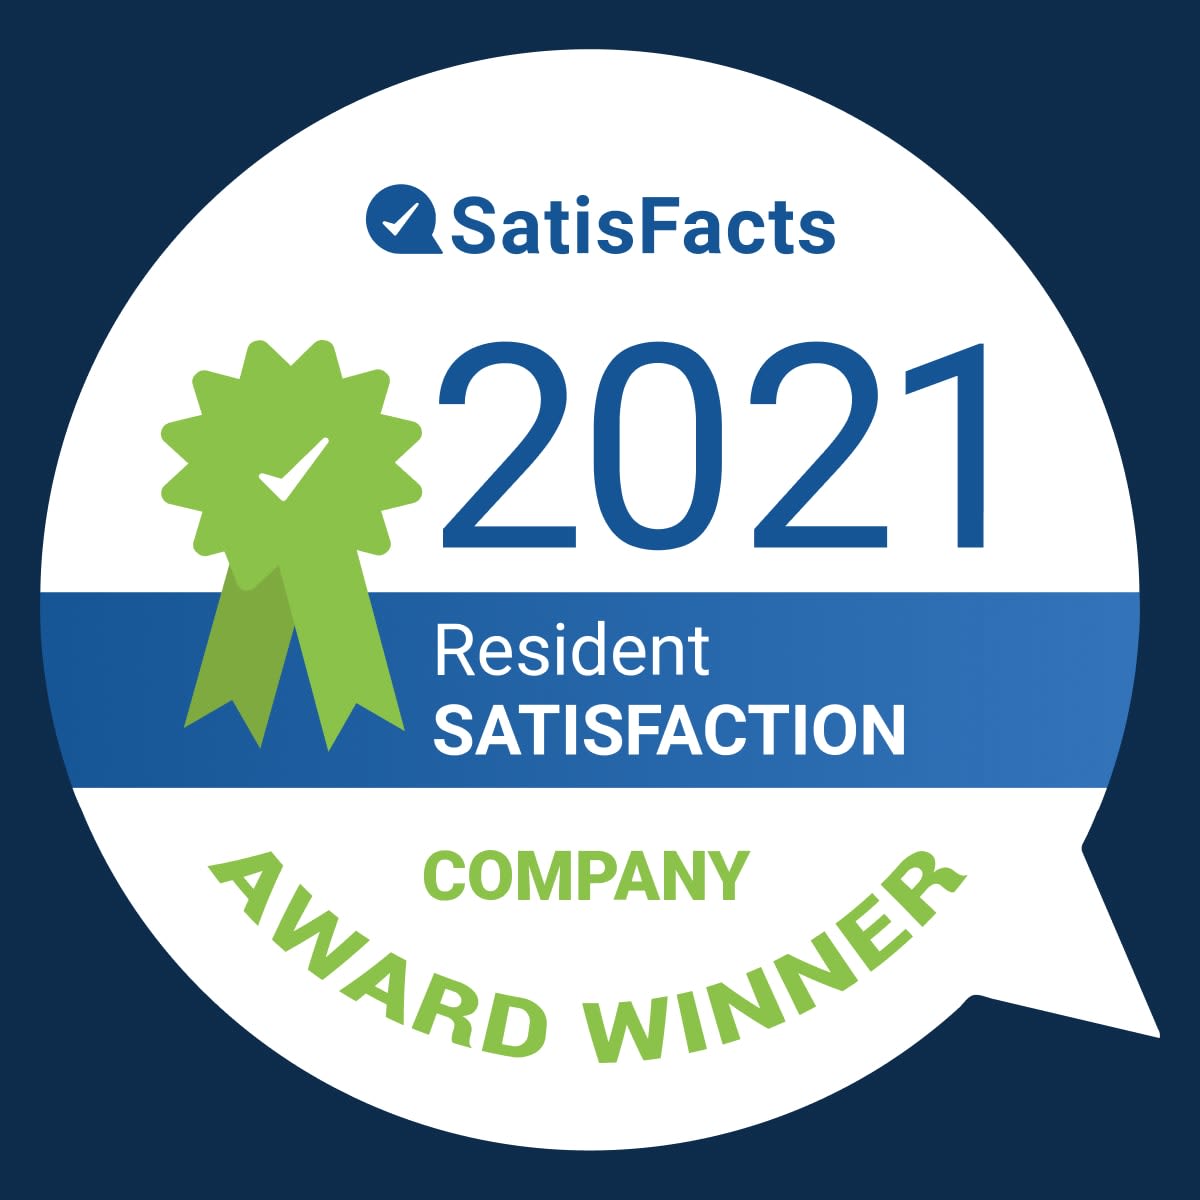 Satisfacts 2021 badge for The Agave in Tucson, Arizona